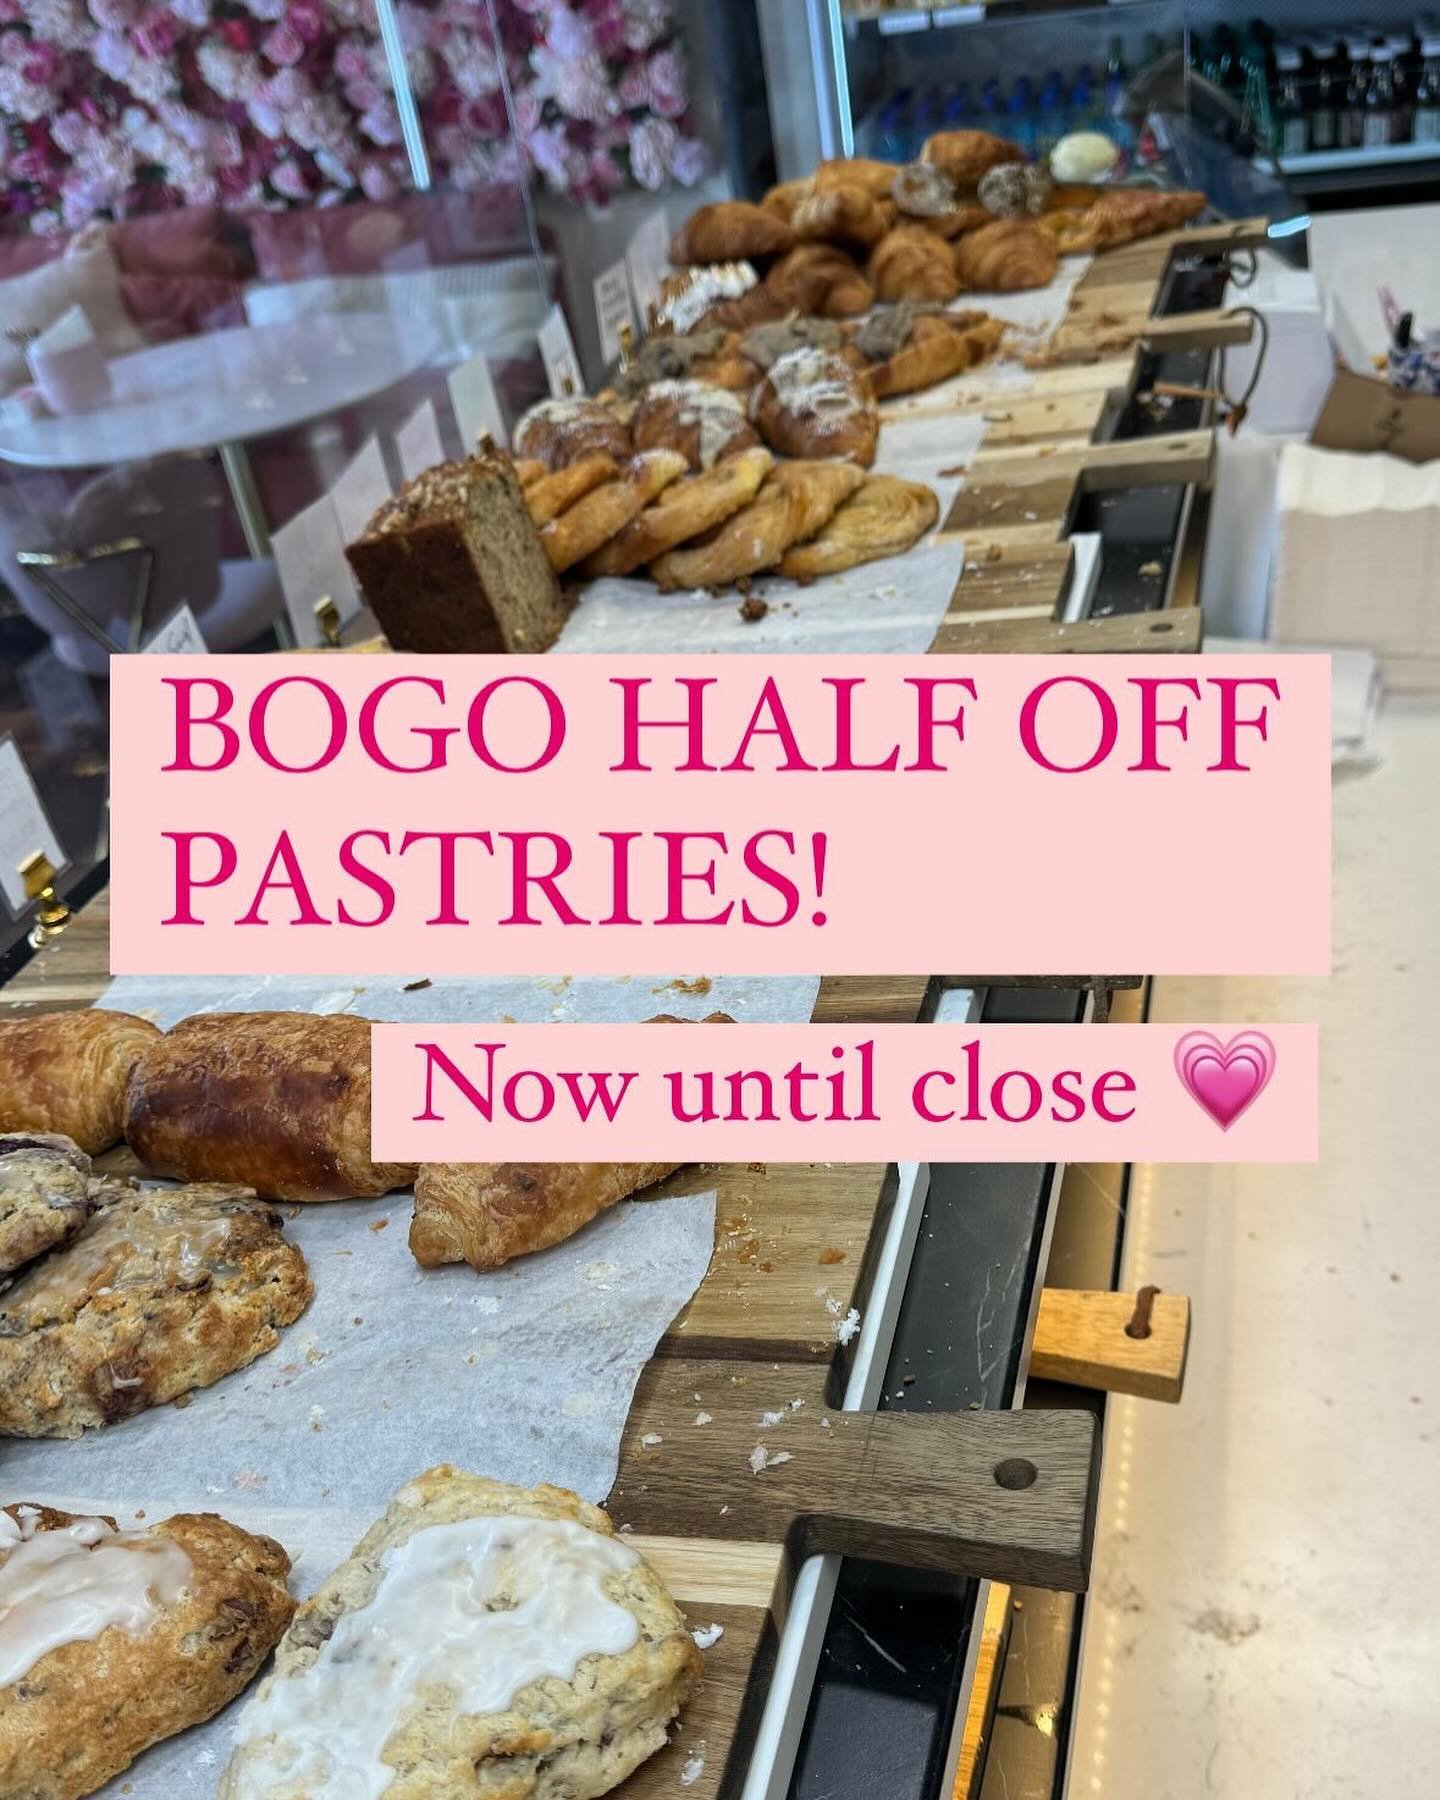 This is not a drill! We over prepped for the farmers market today so come stock up on some pastries! Deal is for croissants, danishes, scones, turnovers and breads 🫶